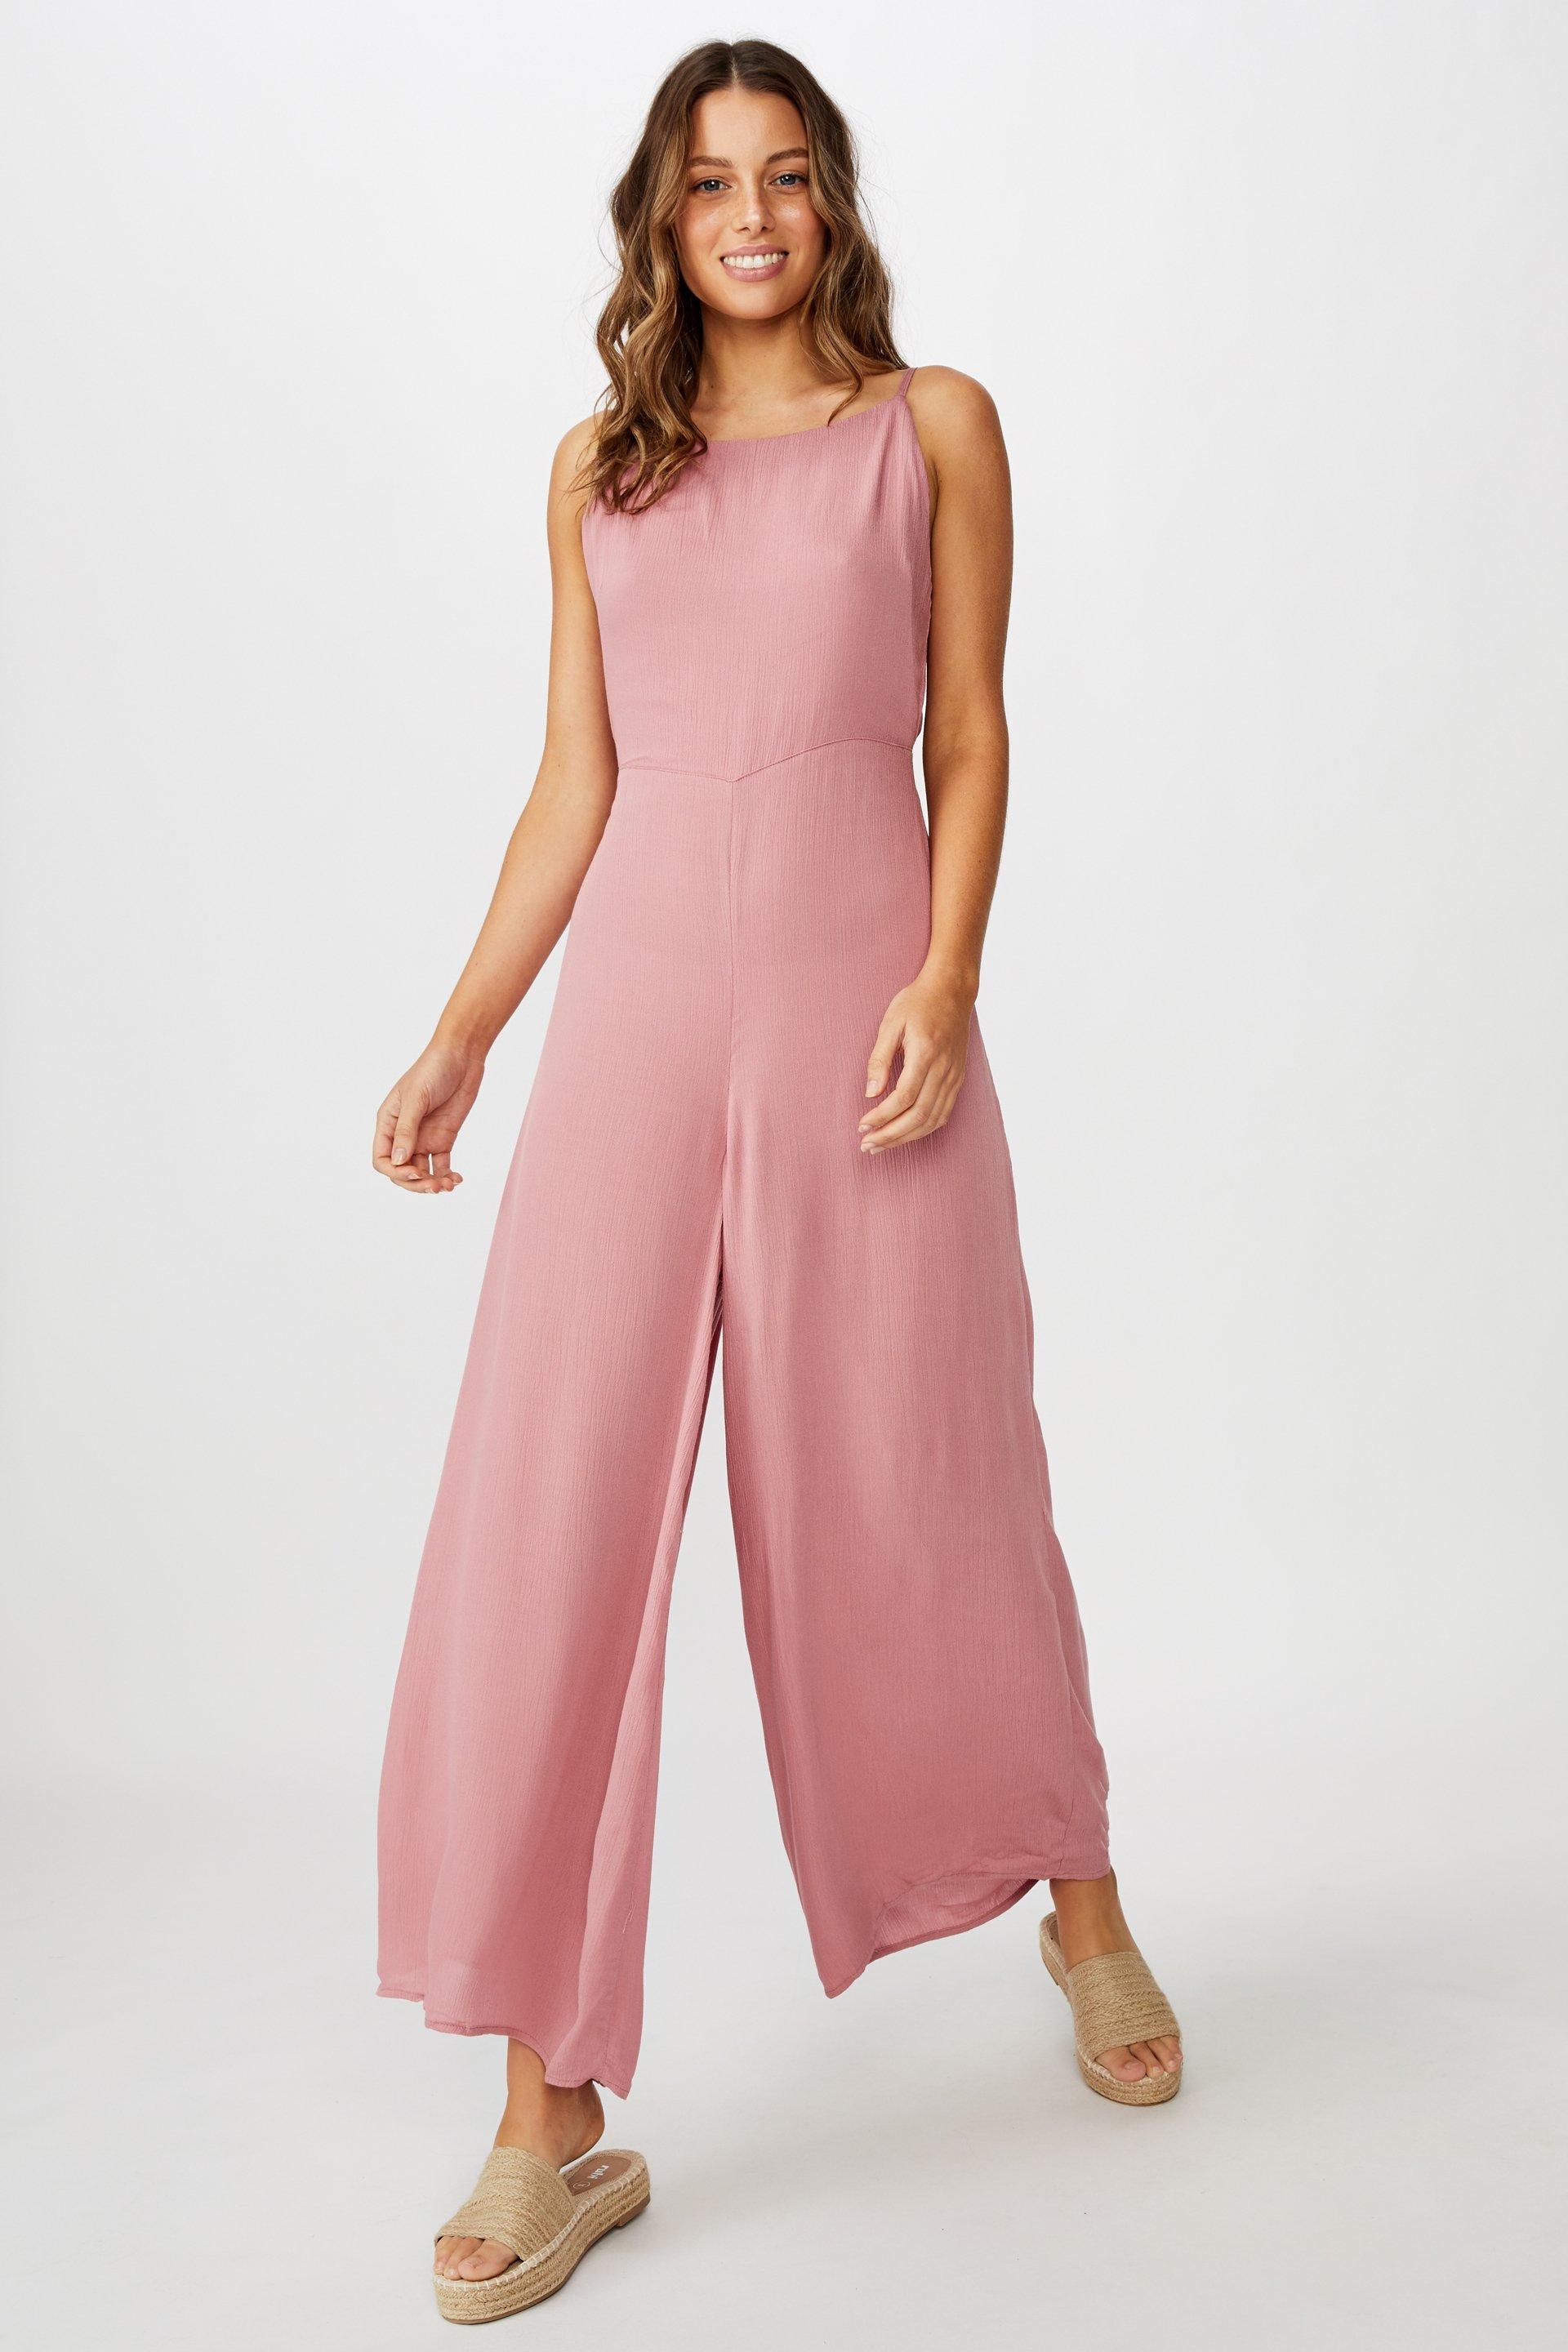 Woven rosie tie back jumpsuit - pink Cotton On Jumpsuits & Playsuits ...